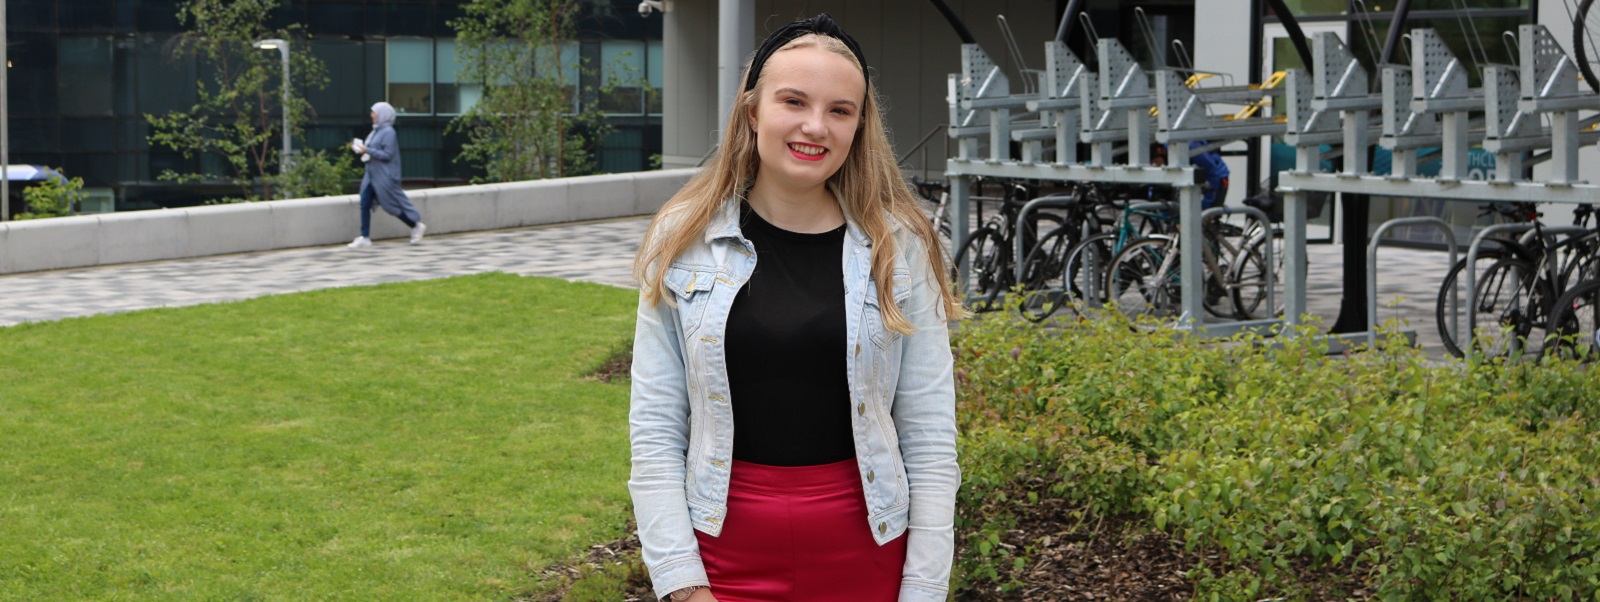 Languages student Chloe Pearson on campus